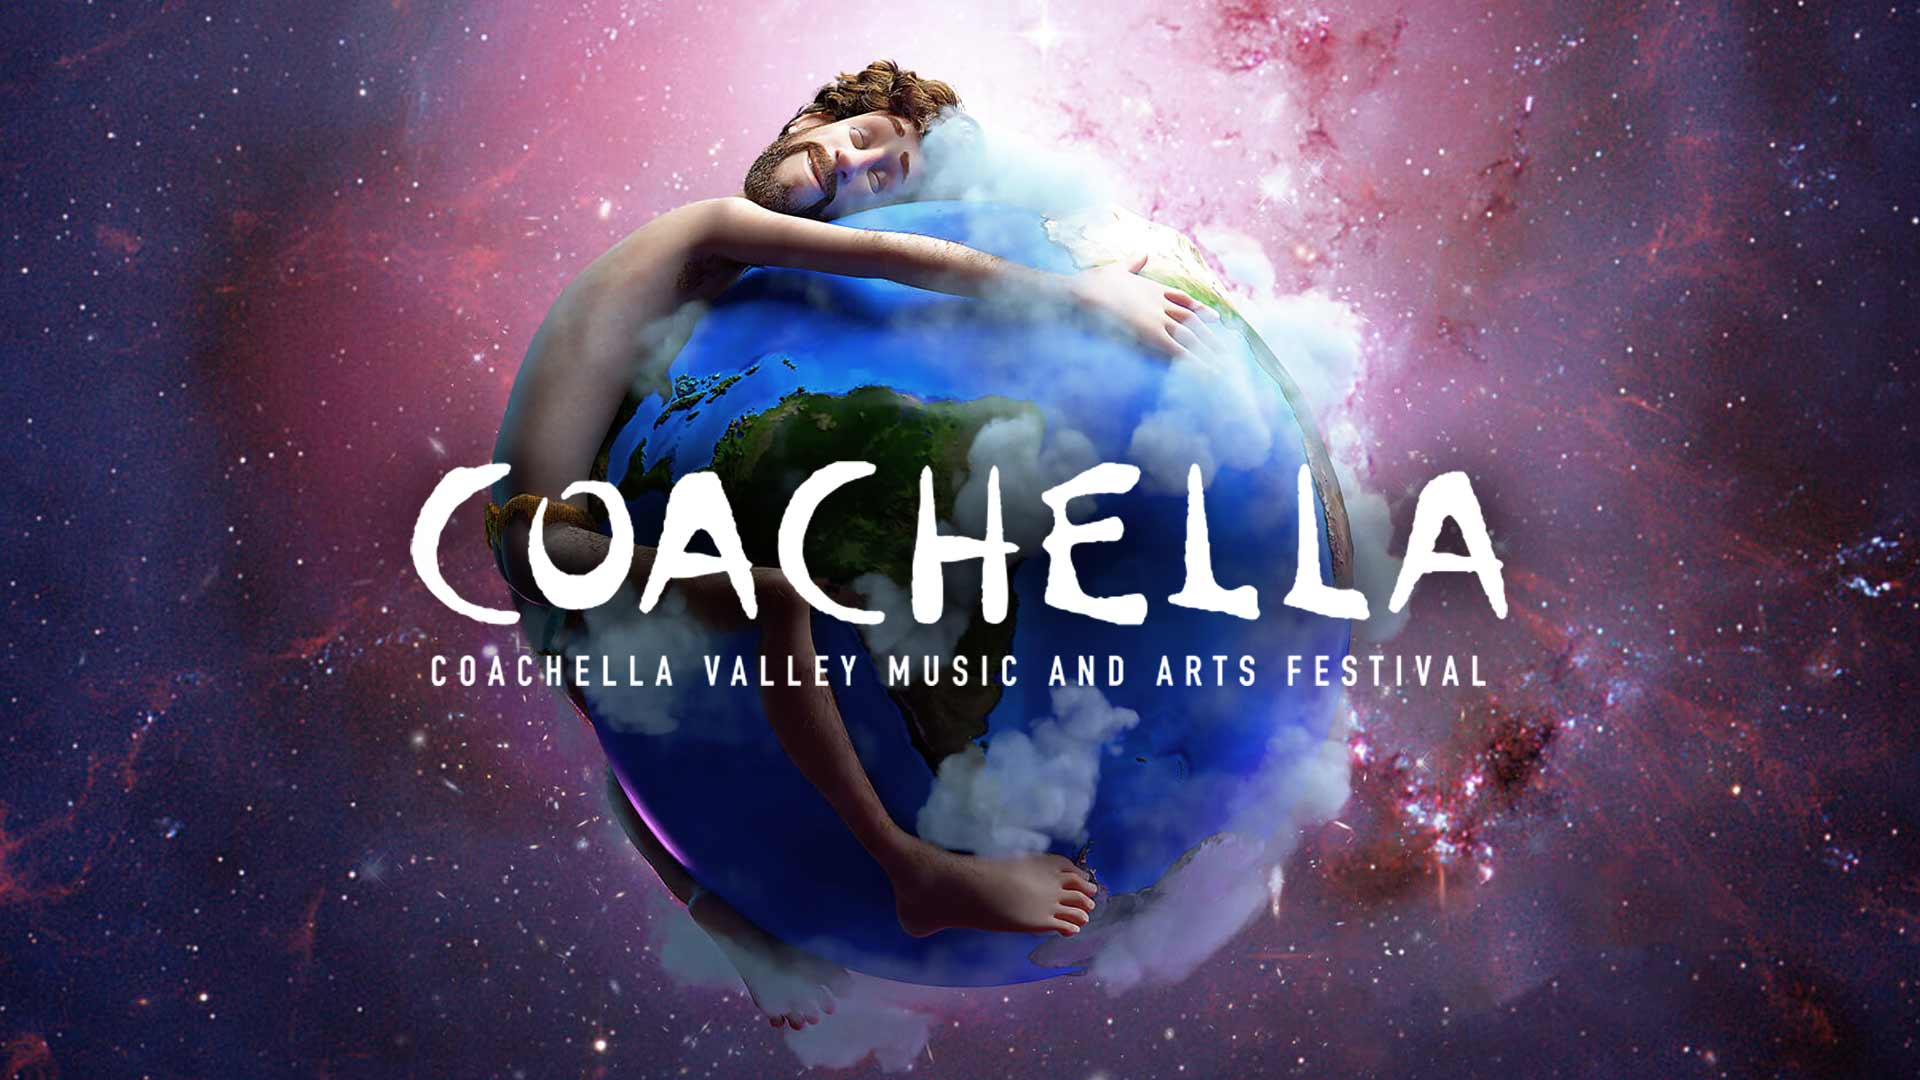 Lil Dicky's 'Earth' Will Be Played During 2nd Weekend of Coachella